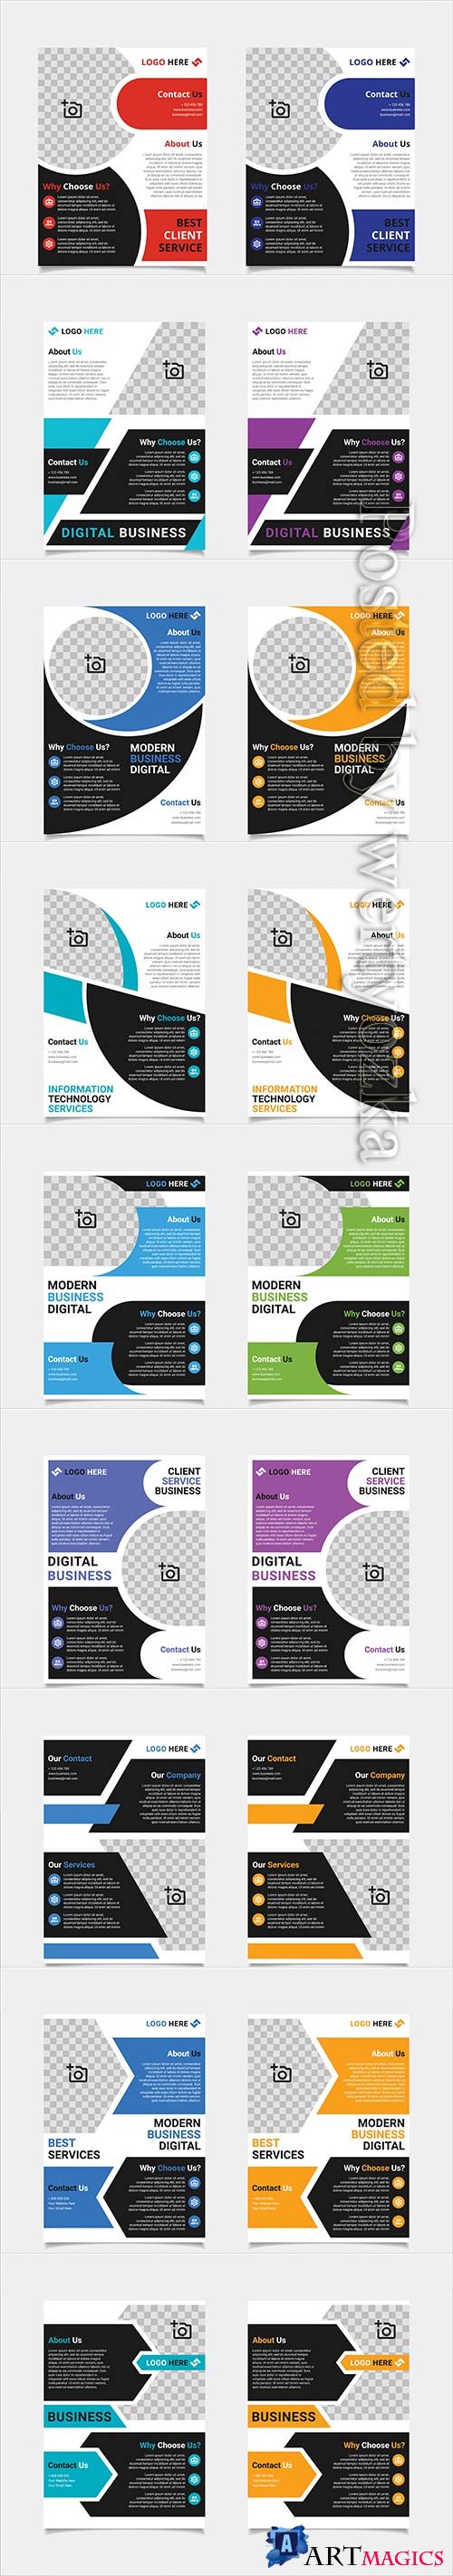 Business brochure and flyer vector design template, business company poster